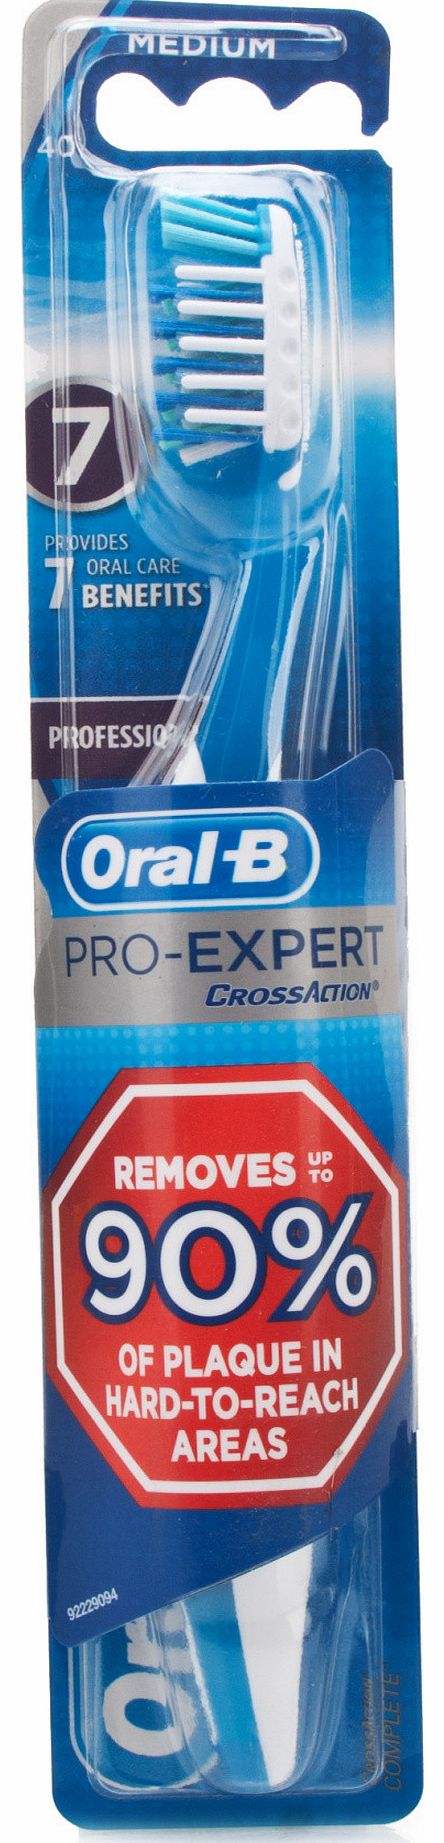 Oral-B Pro-Expert CrossAction Professional 40